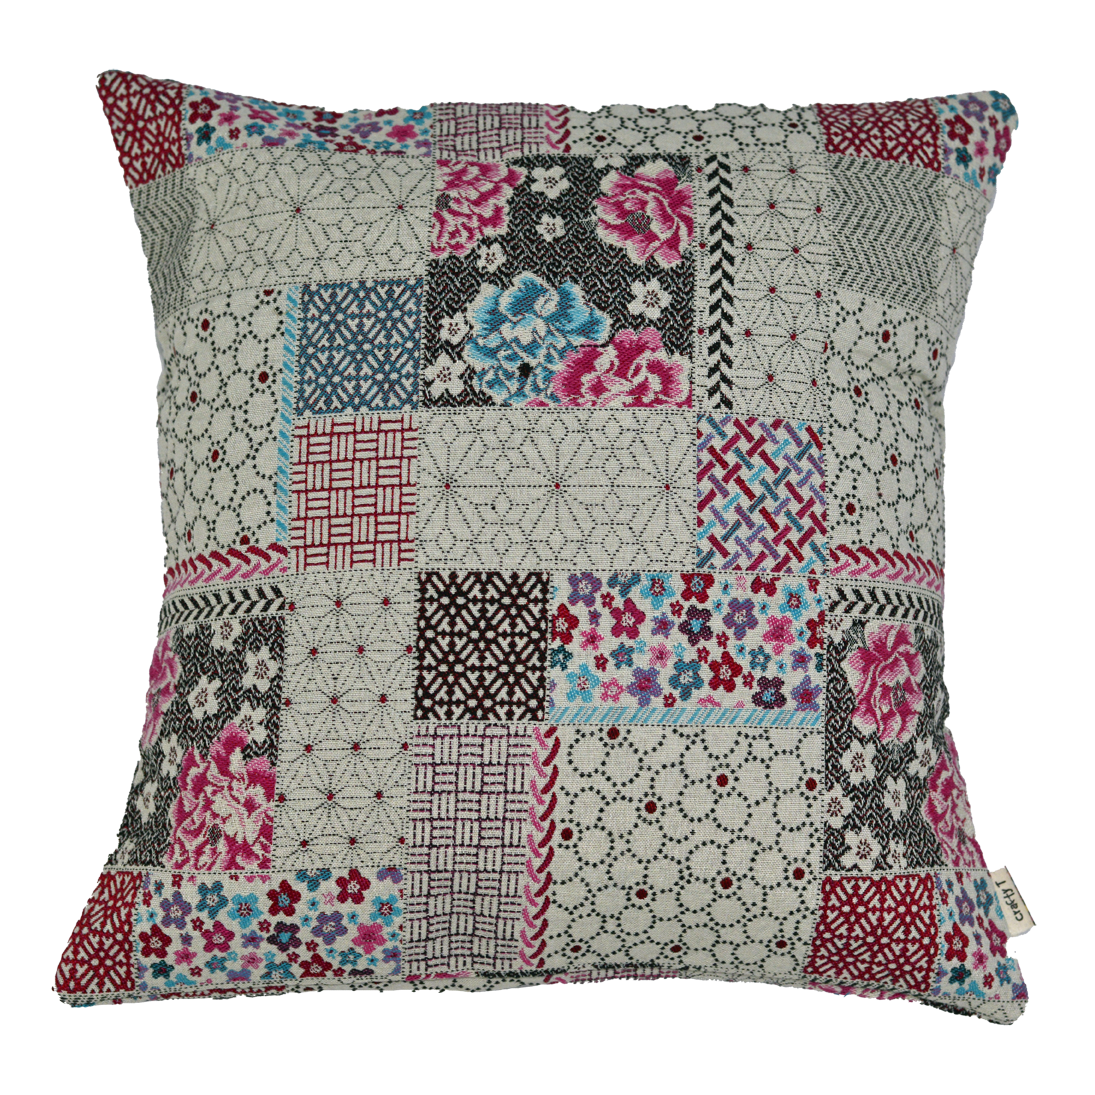 Pink patchwork tapestry cushion cover - Harlan House & Home